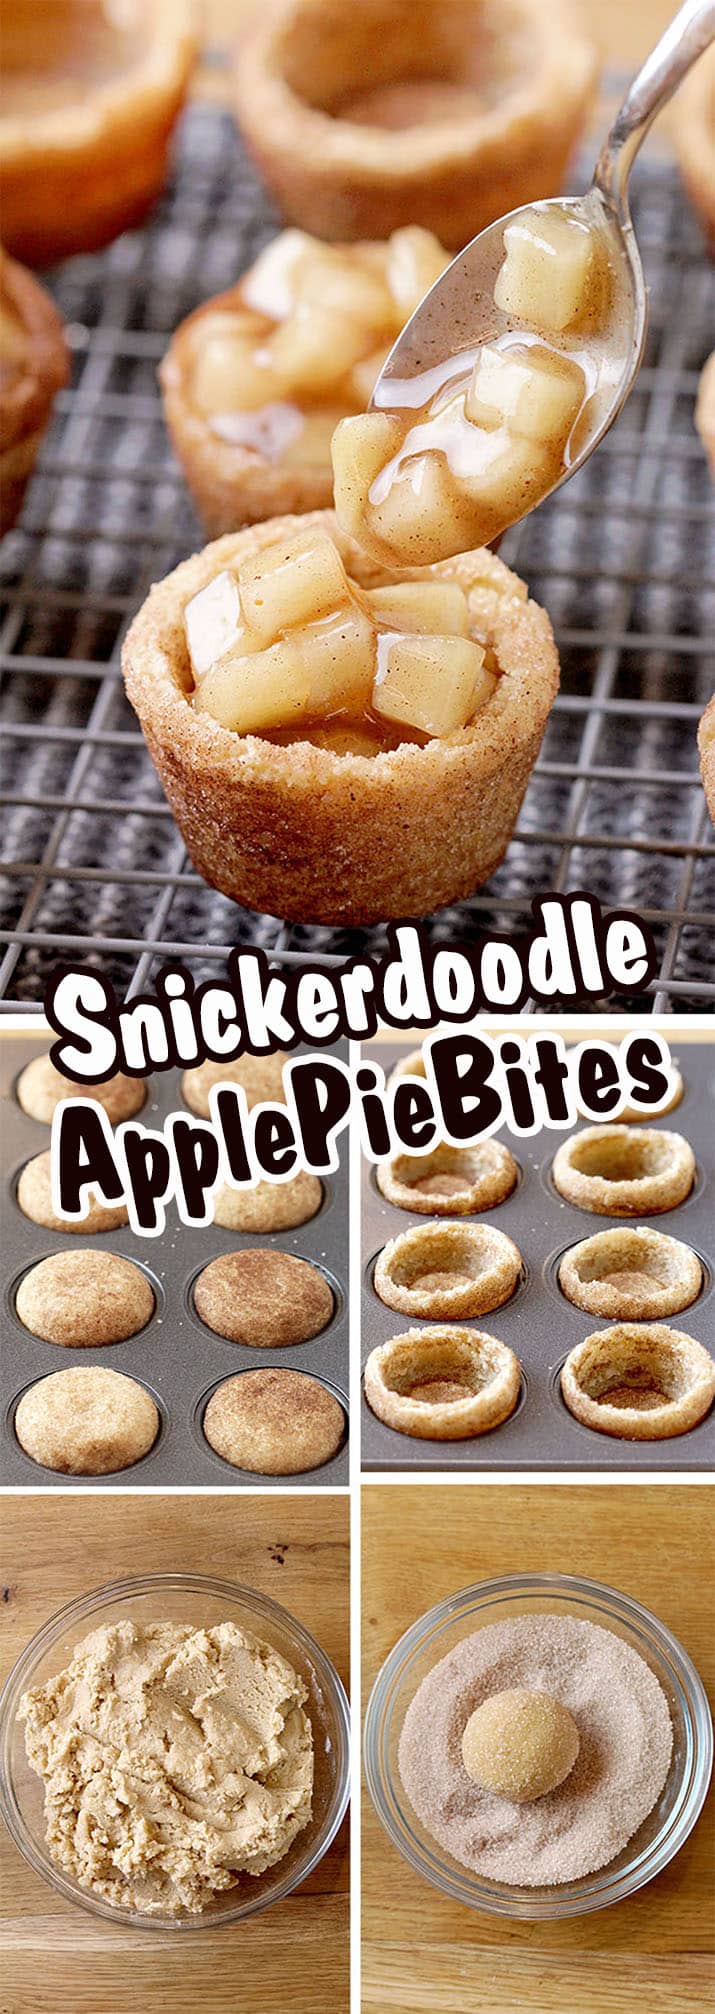 Snickerdoodle Apple Pie Bites – snickerdoodle mini cups filled with homemade apple pie filling are perfect small bites that you will love. I like to prepare them for holidays because they look fancy on a holiday dessert plate and everyone loves their amazing taste. 